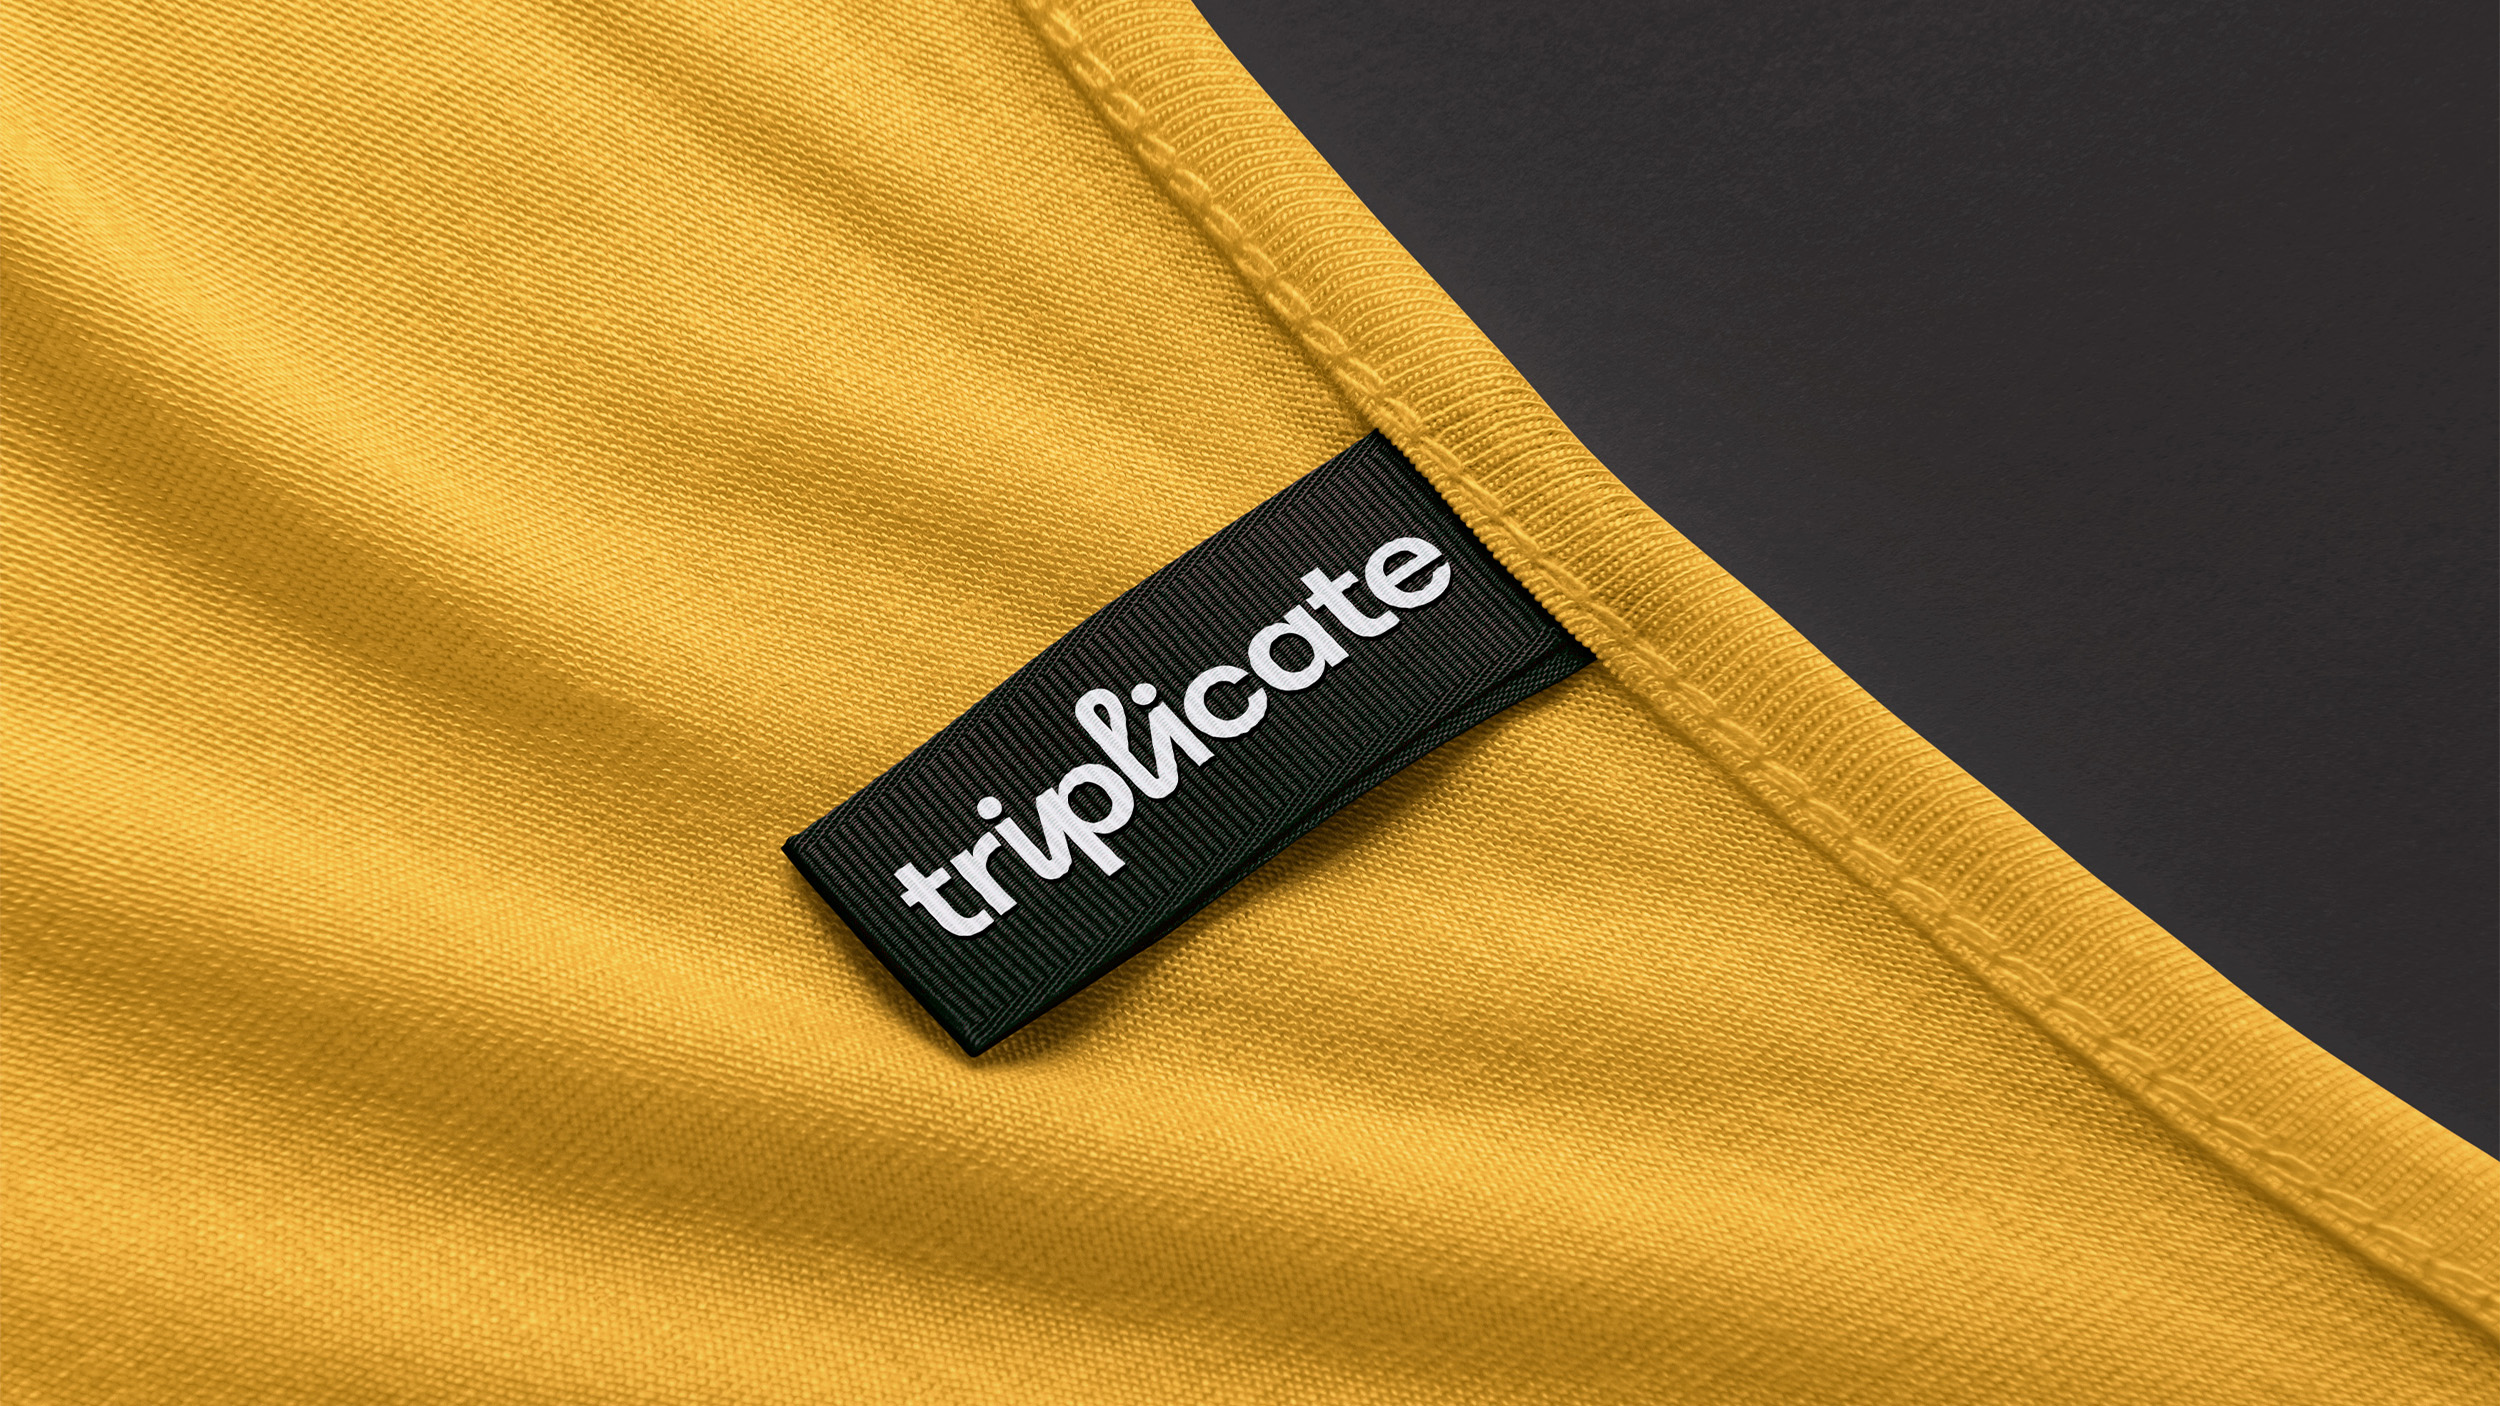 Mockup of shirt tag with the logo on it